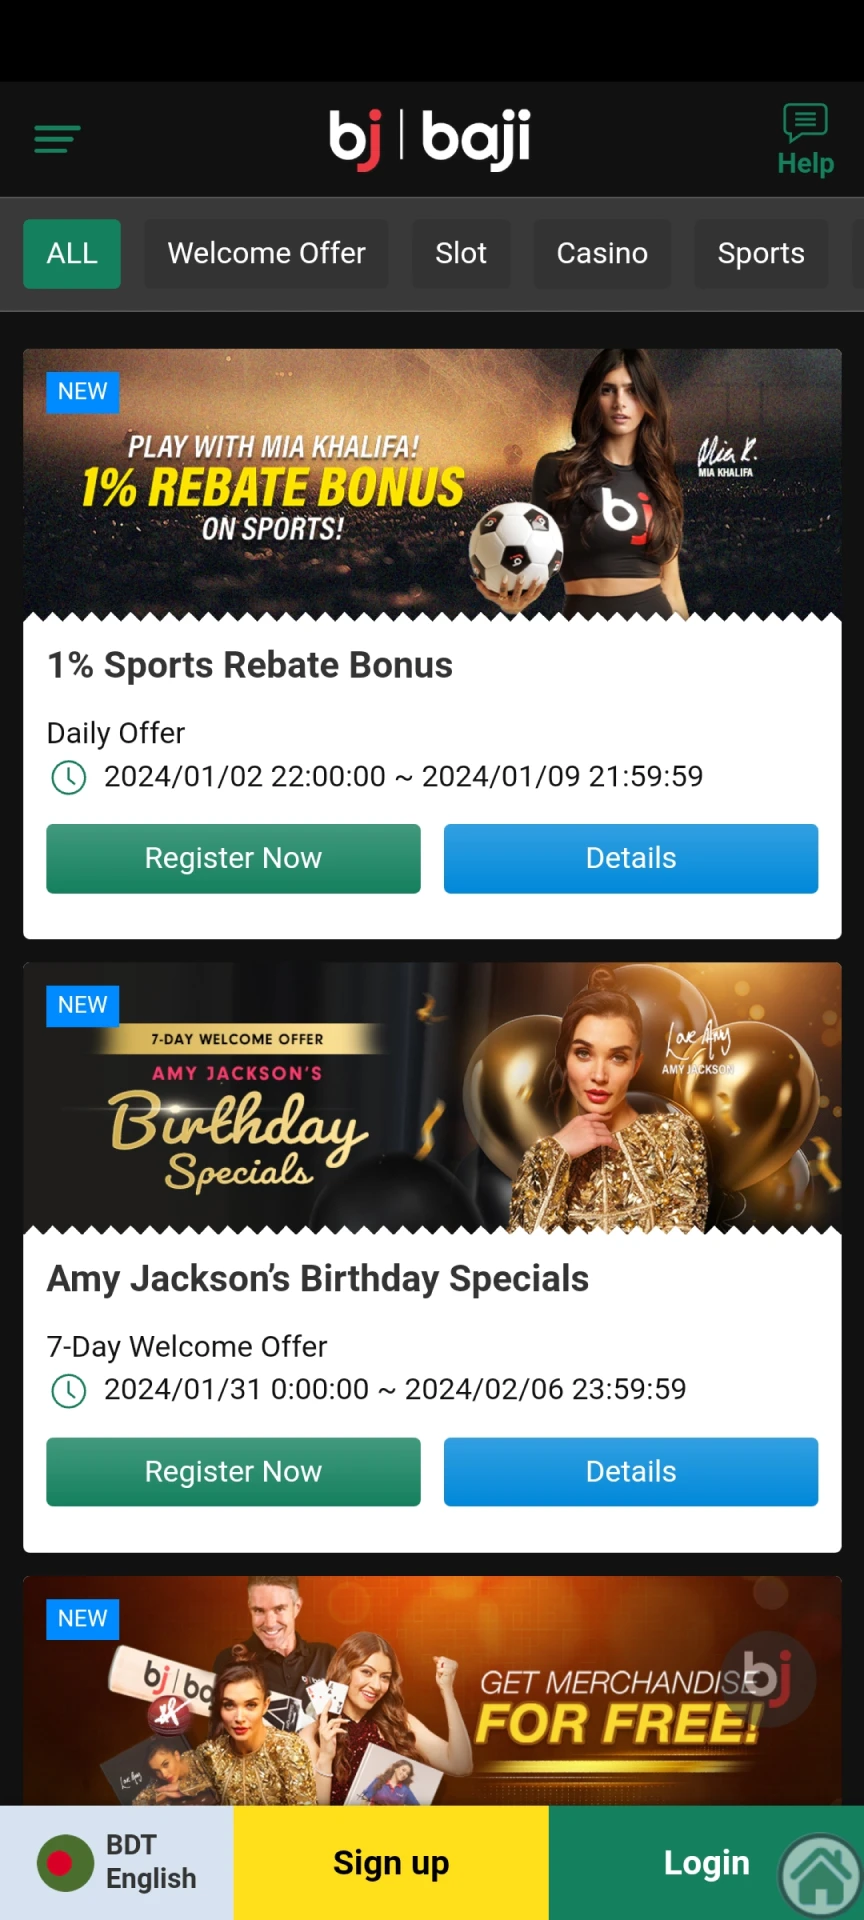 Visit the bonus section in the Baji mobile app, get your welcome bonus and start bet.